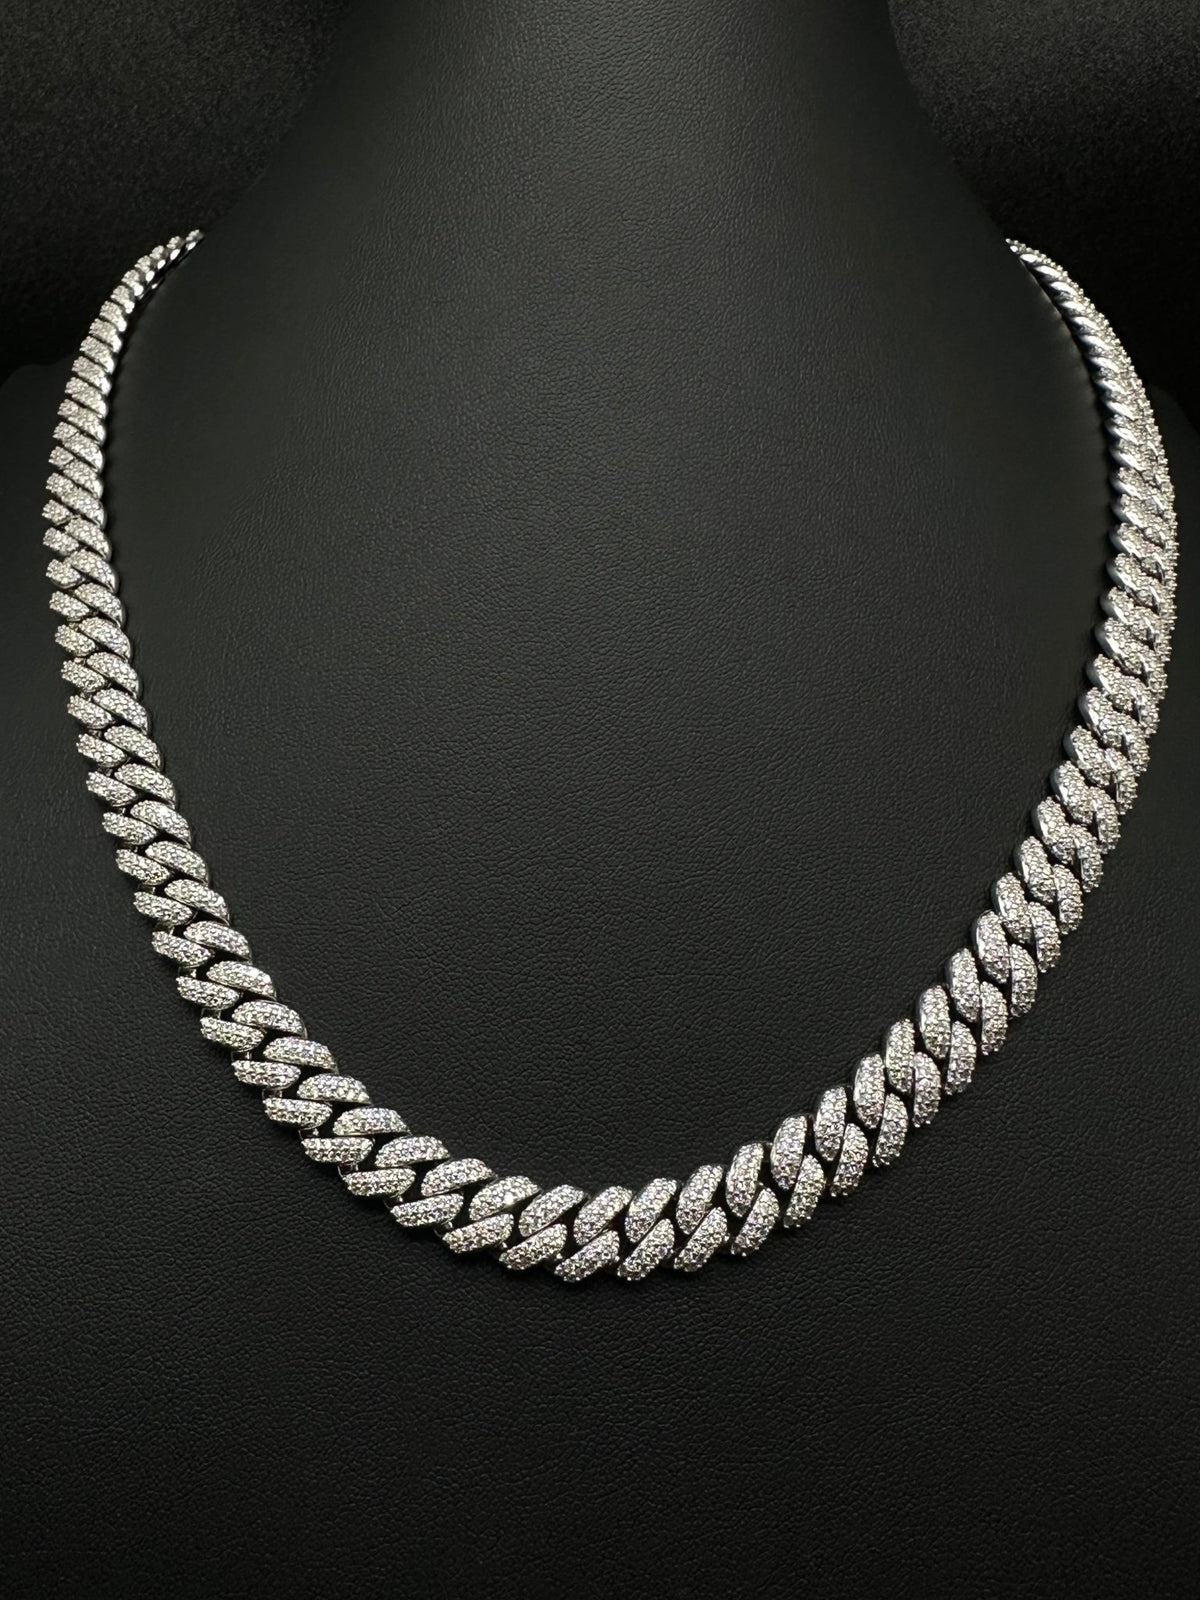 10mm Moissanite Cuban Chain (STOCK) - The Real Jewelry CompanyRoyal Chain GroupNecklaces